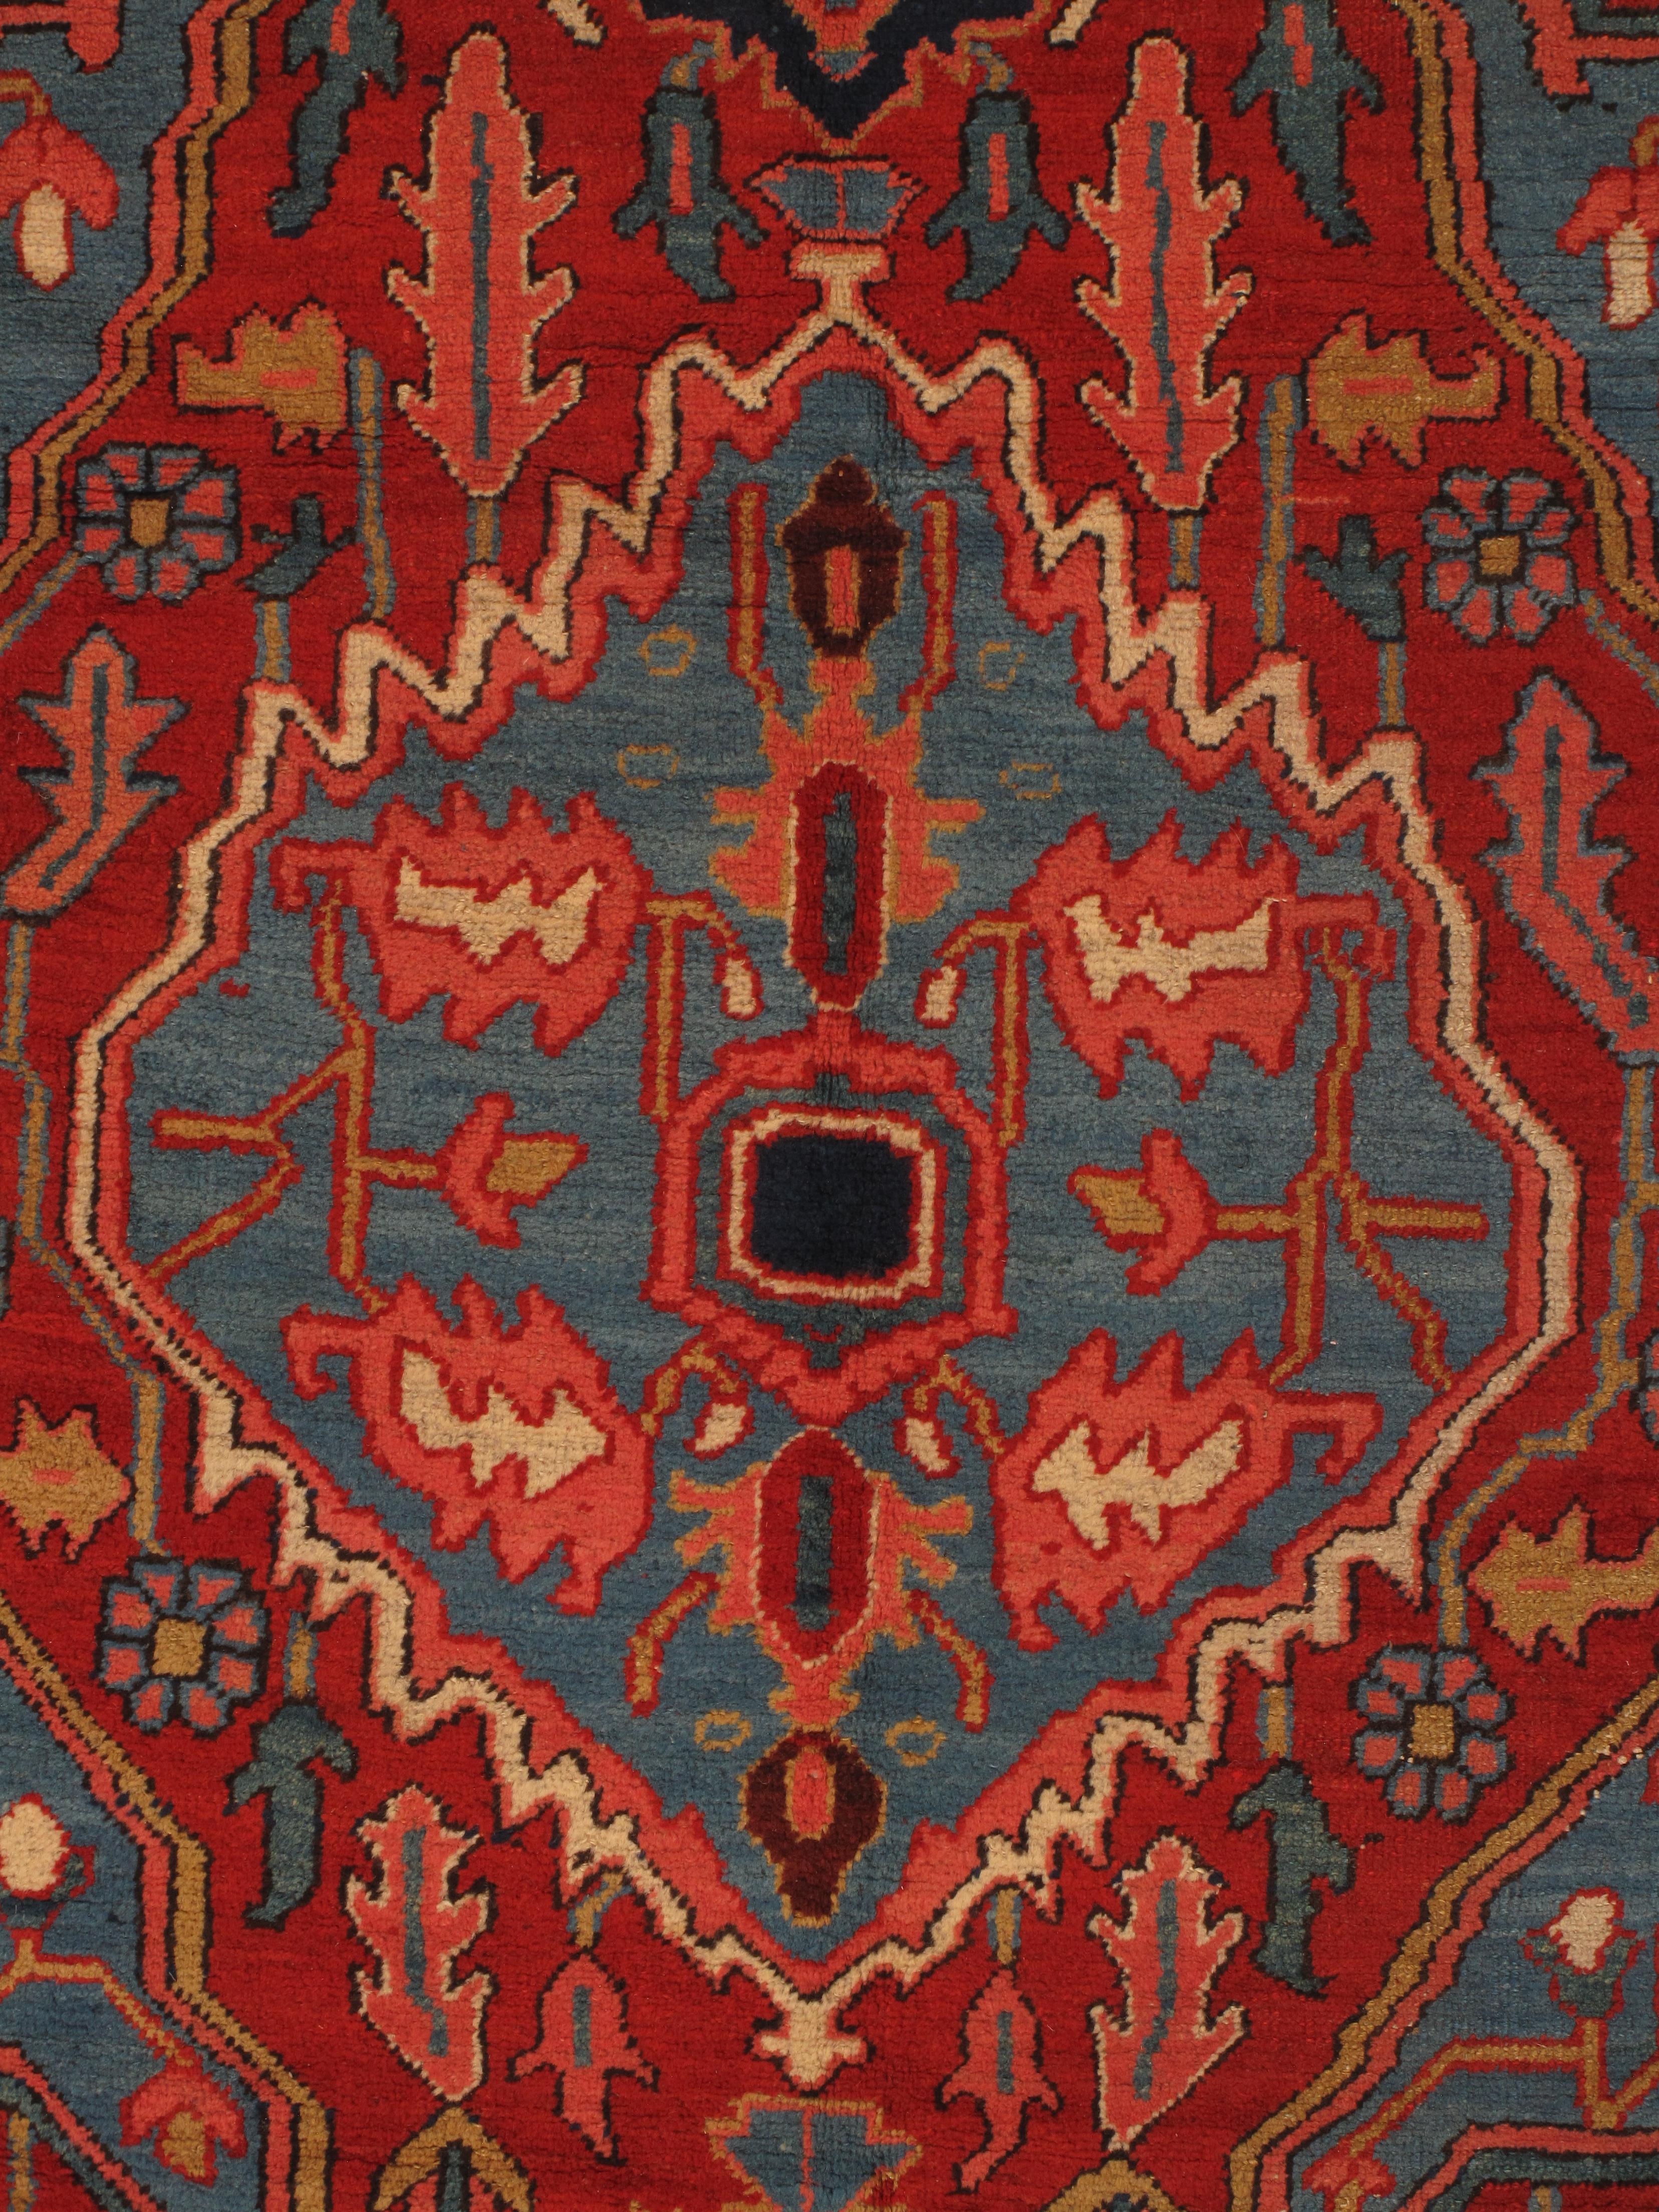 Late 19th and early 20th-century Serapi rugs represent a pinnacle of artistic achievement in Persian carpet weaving. Originating from the Serab village in the Heriz region of Northwest Persia (now Iran), these rugs are renowned for their bold,